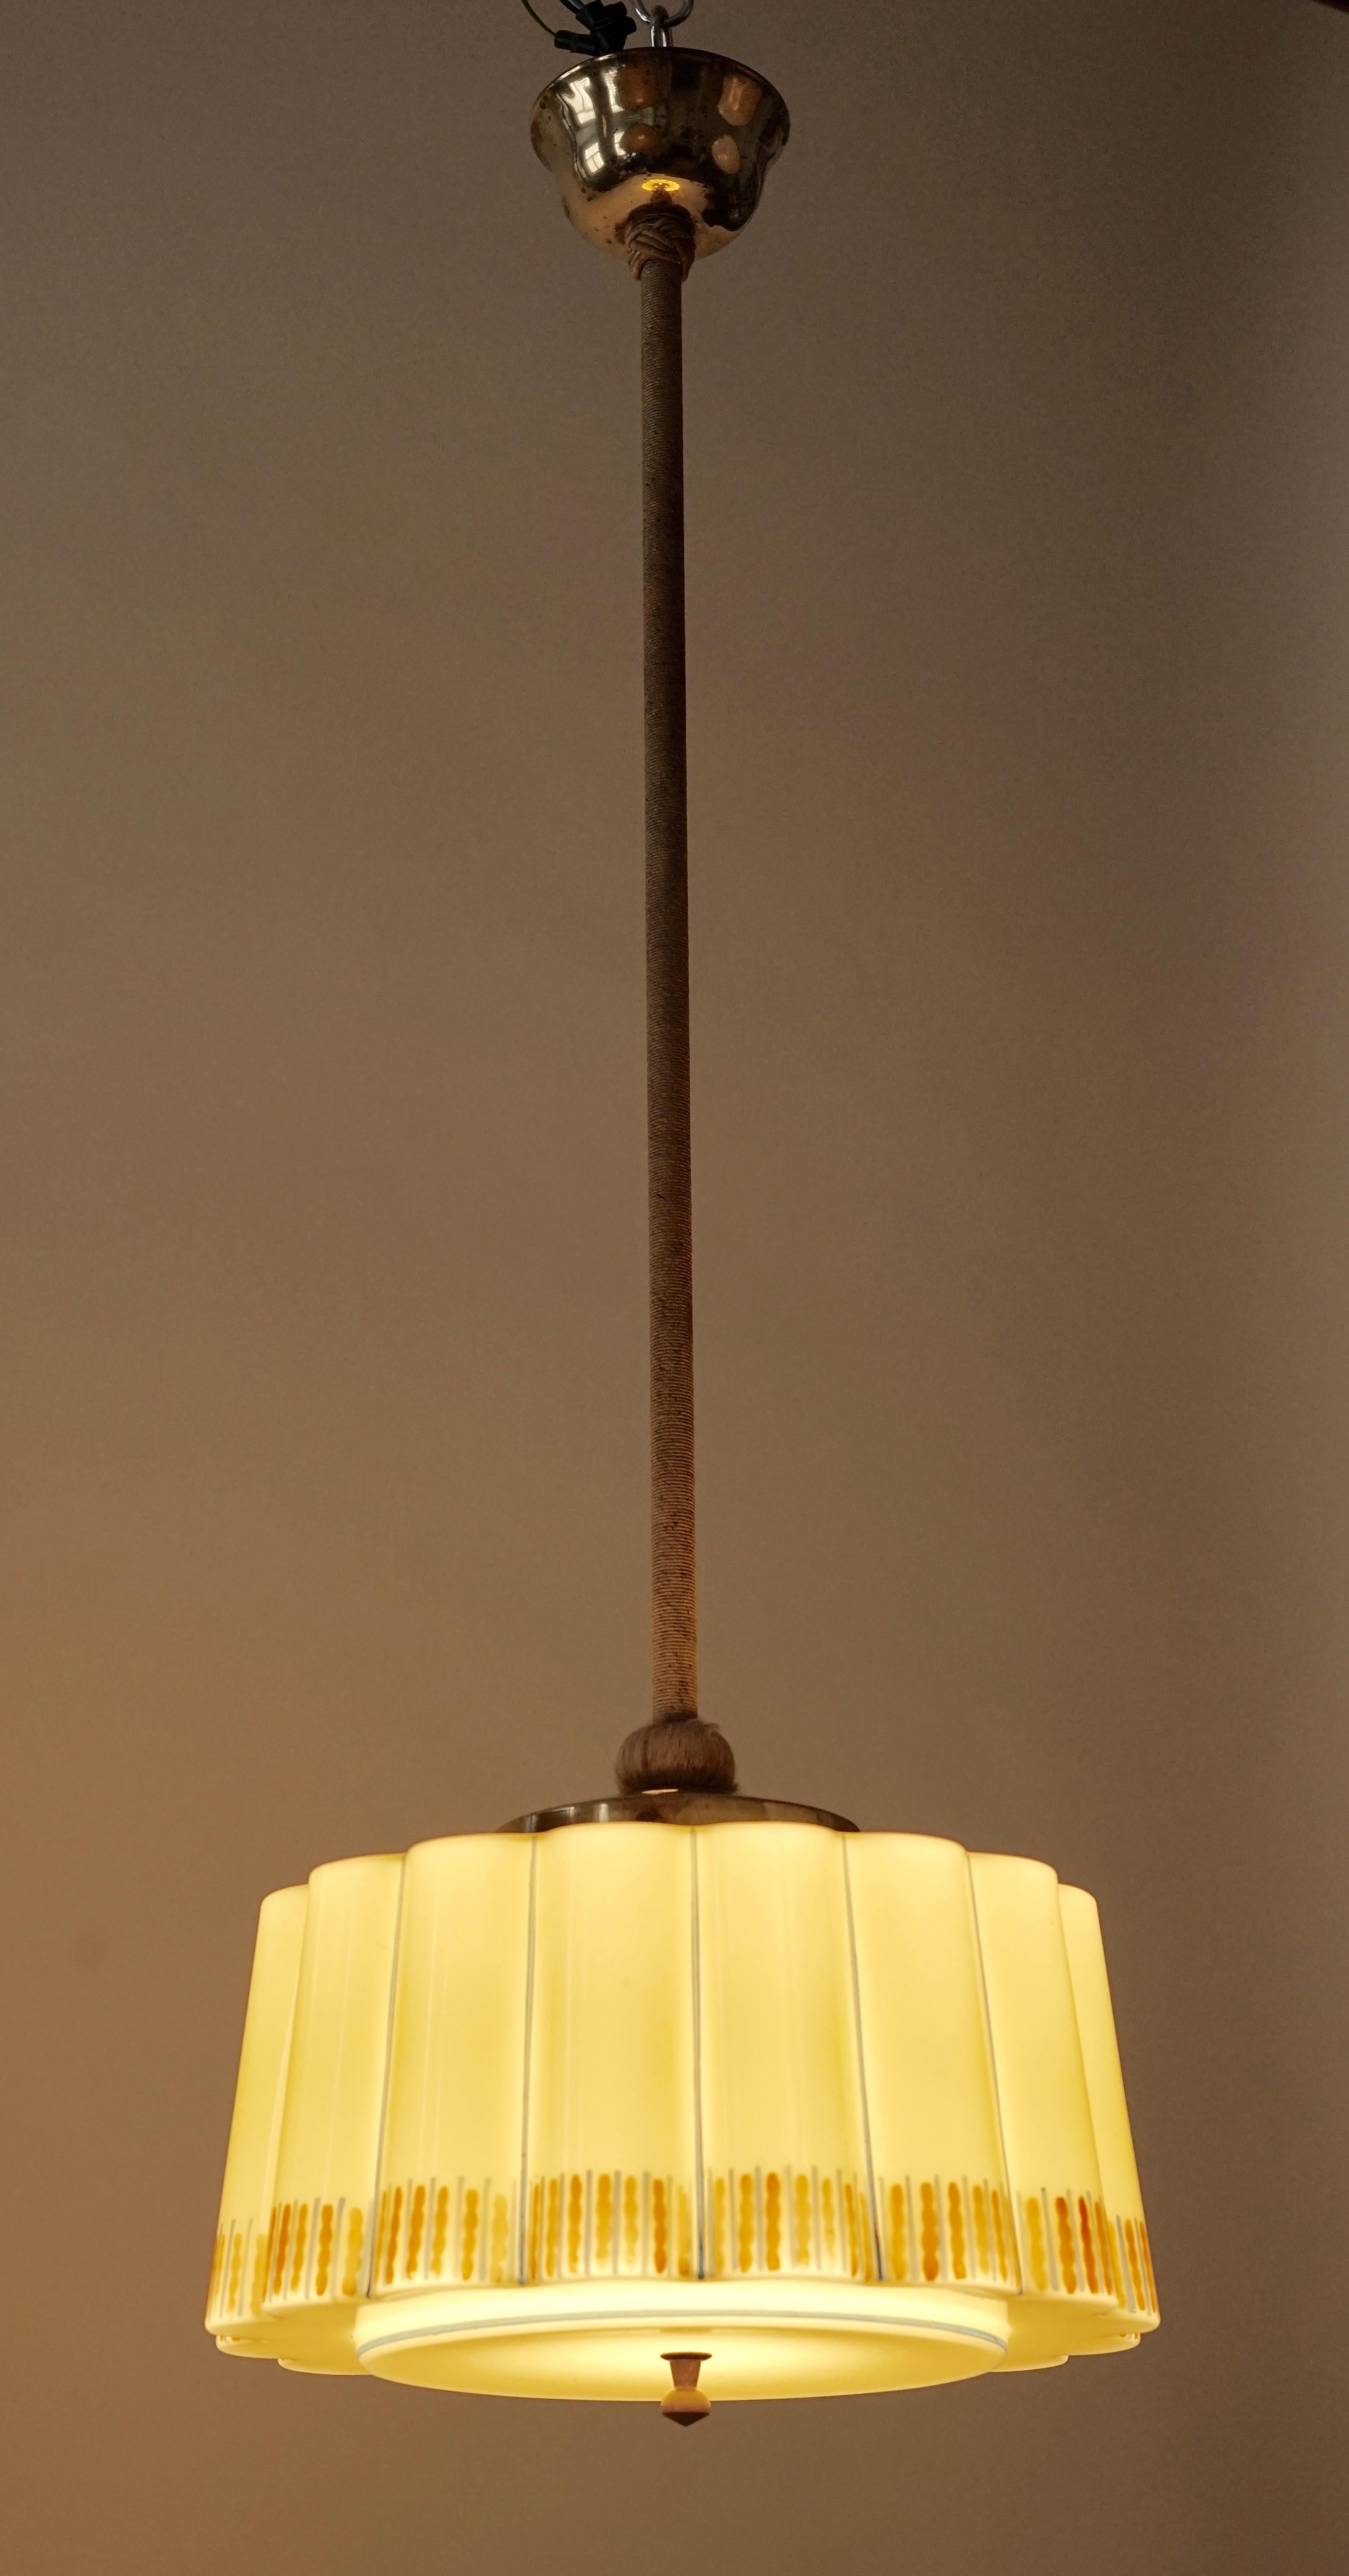 Early 20th Century Art Deco Pendant Lamp with Hand Colored Details and Passementerie